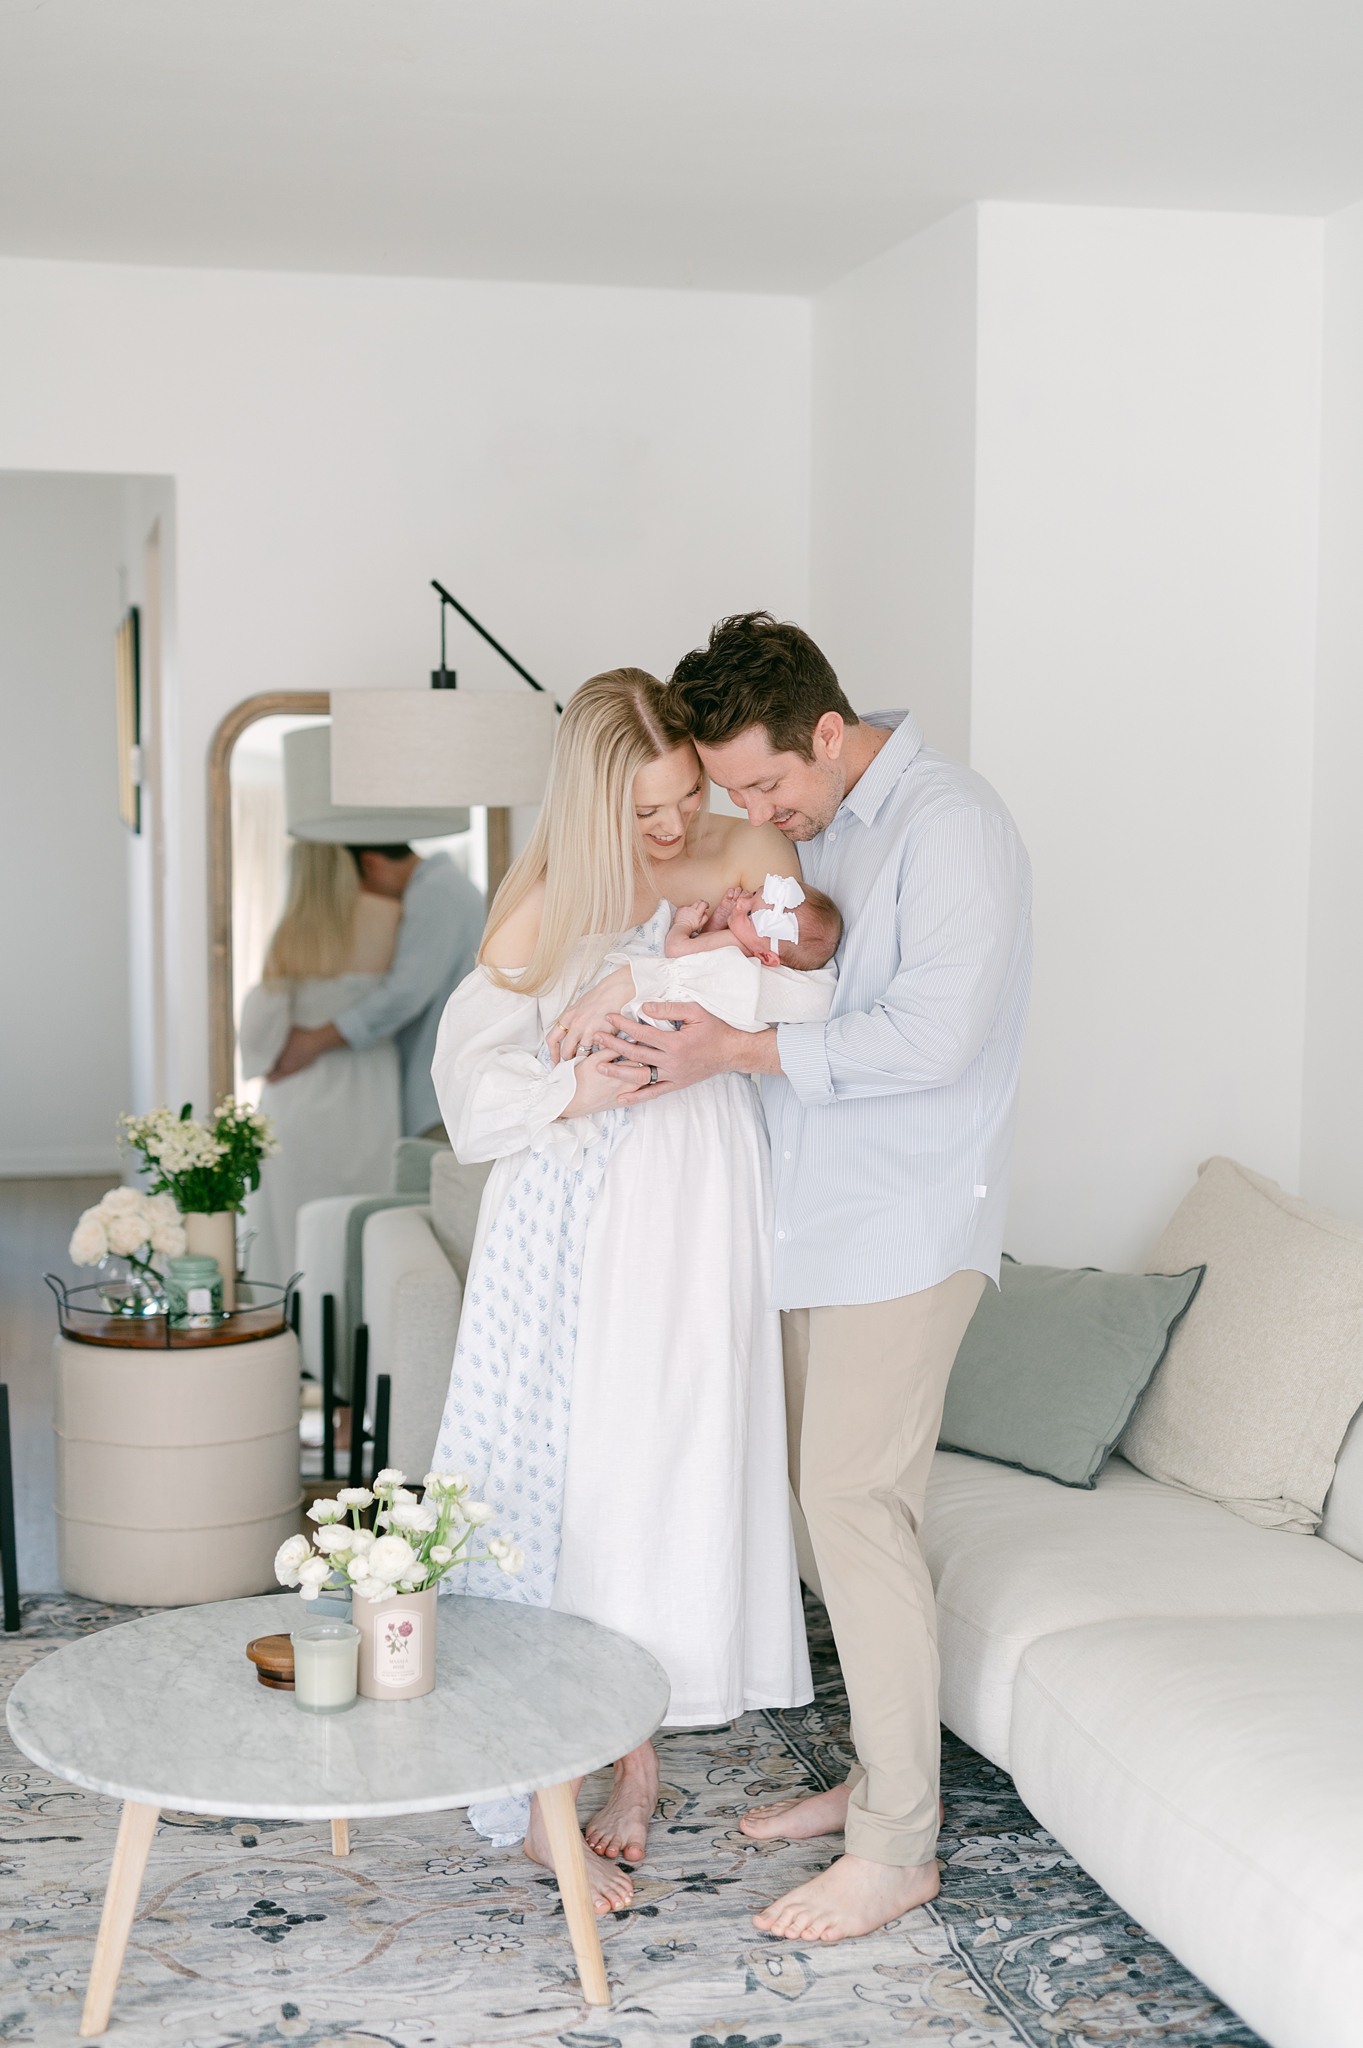 Mom and dad hold their baby in the living room during a newborn photography session with Abby Park Photography